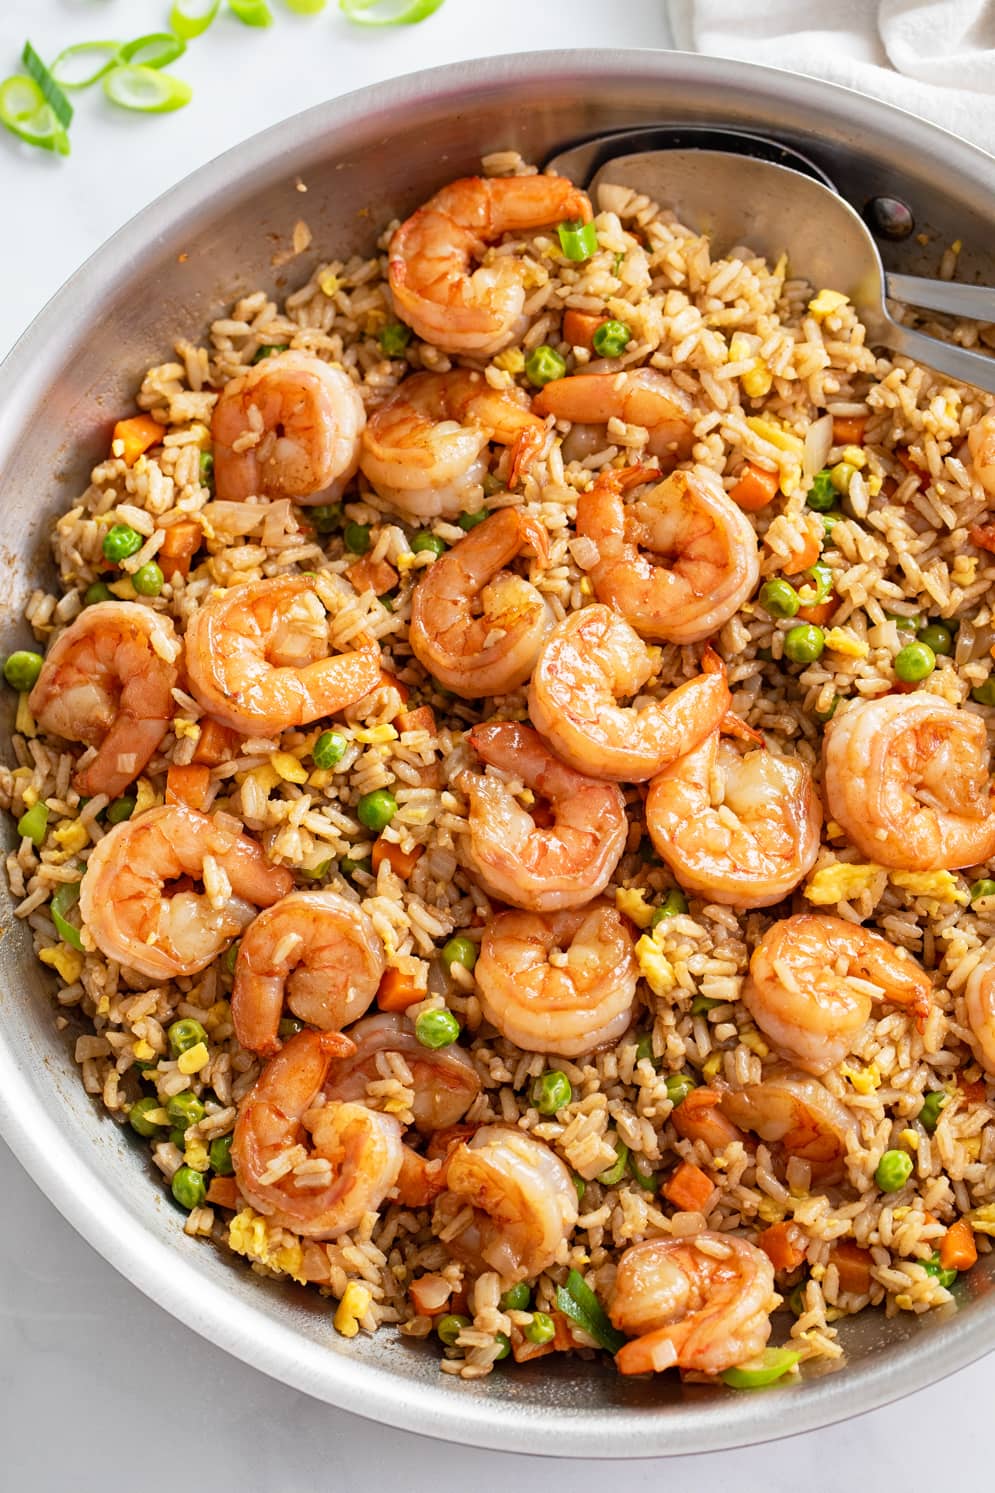 A skillet of Shrimp Fried Rice with brown sauce, eggs, and vegetables.